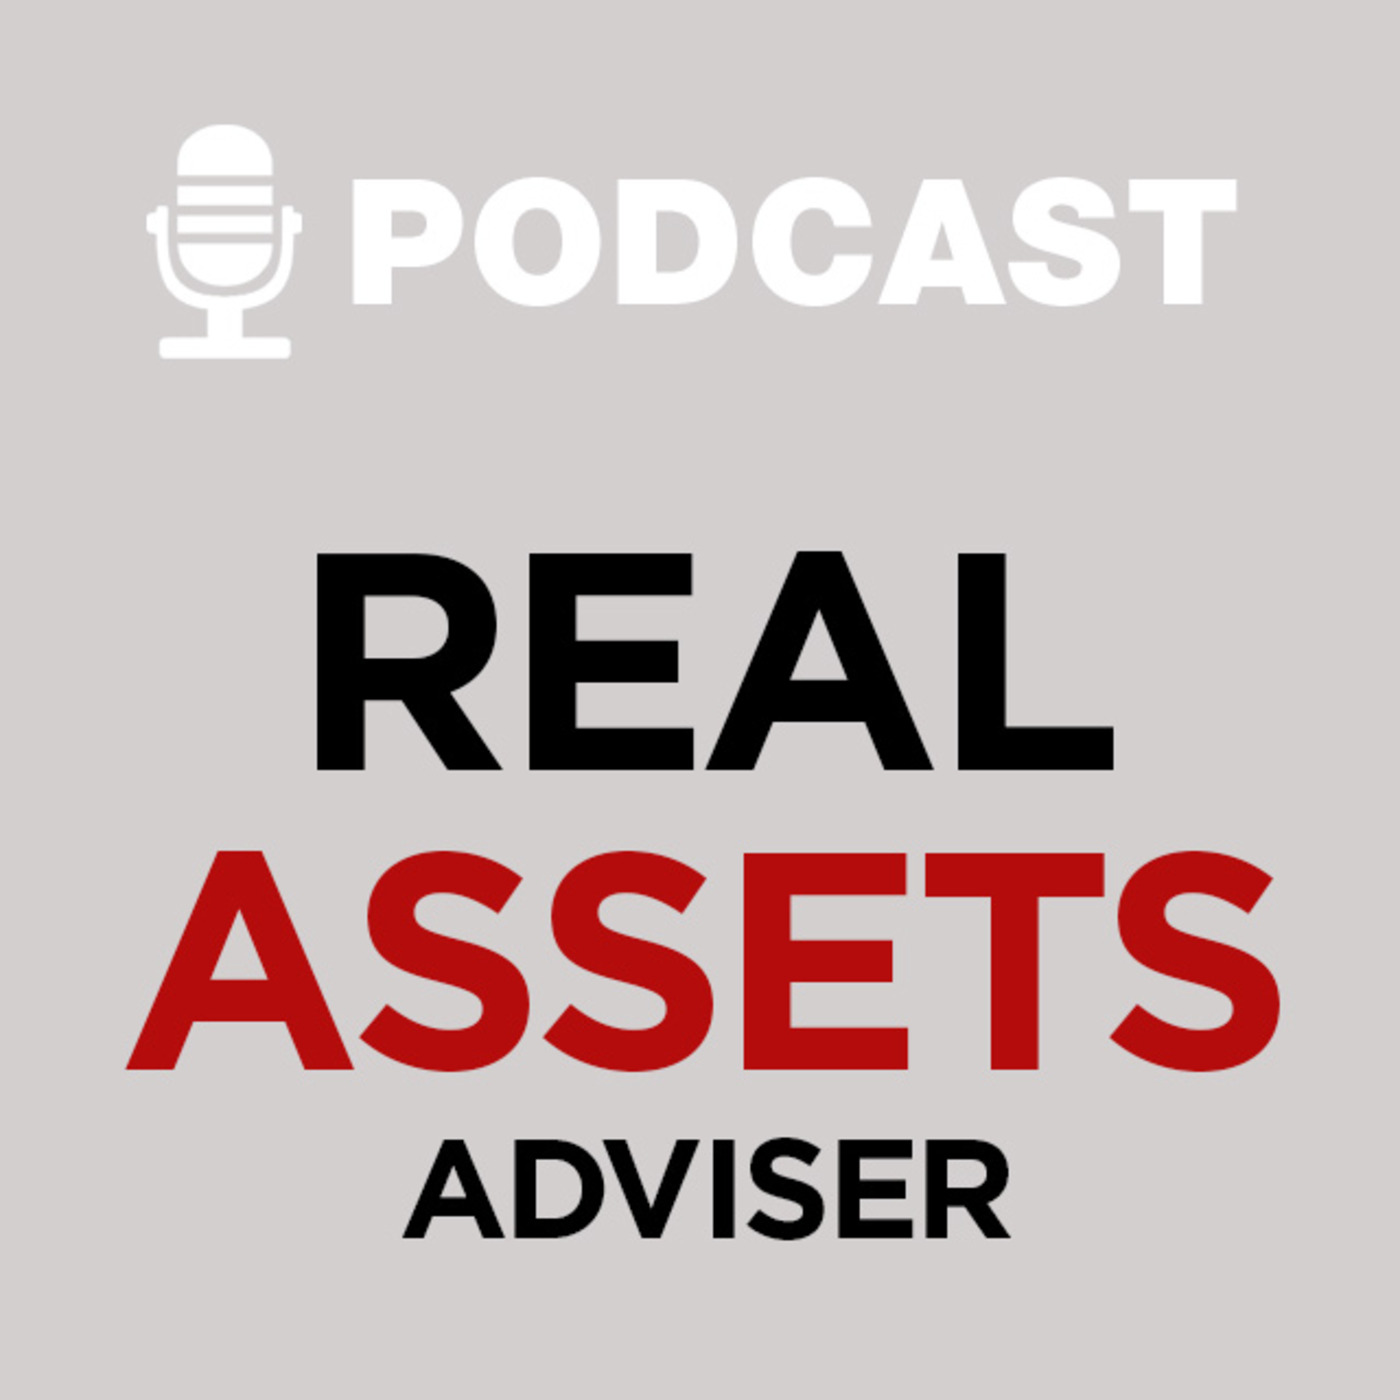 Episode 1152: Investment opportunities in real estate debt — inflation and interest rates be damned